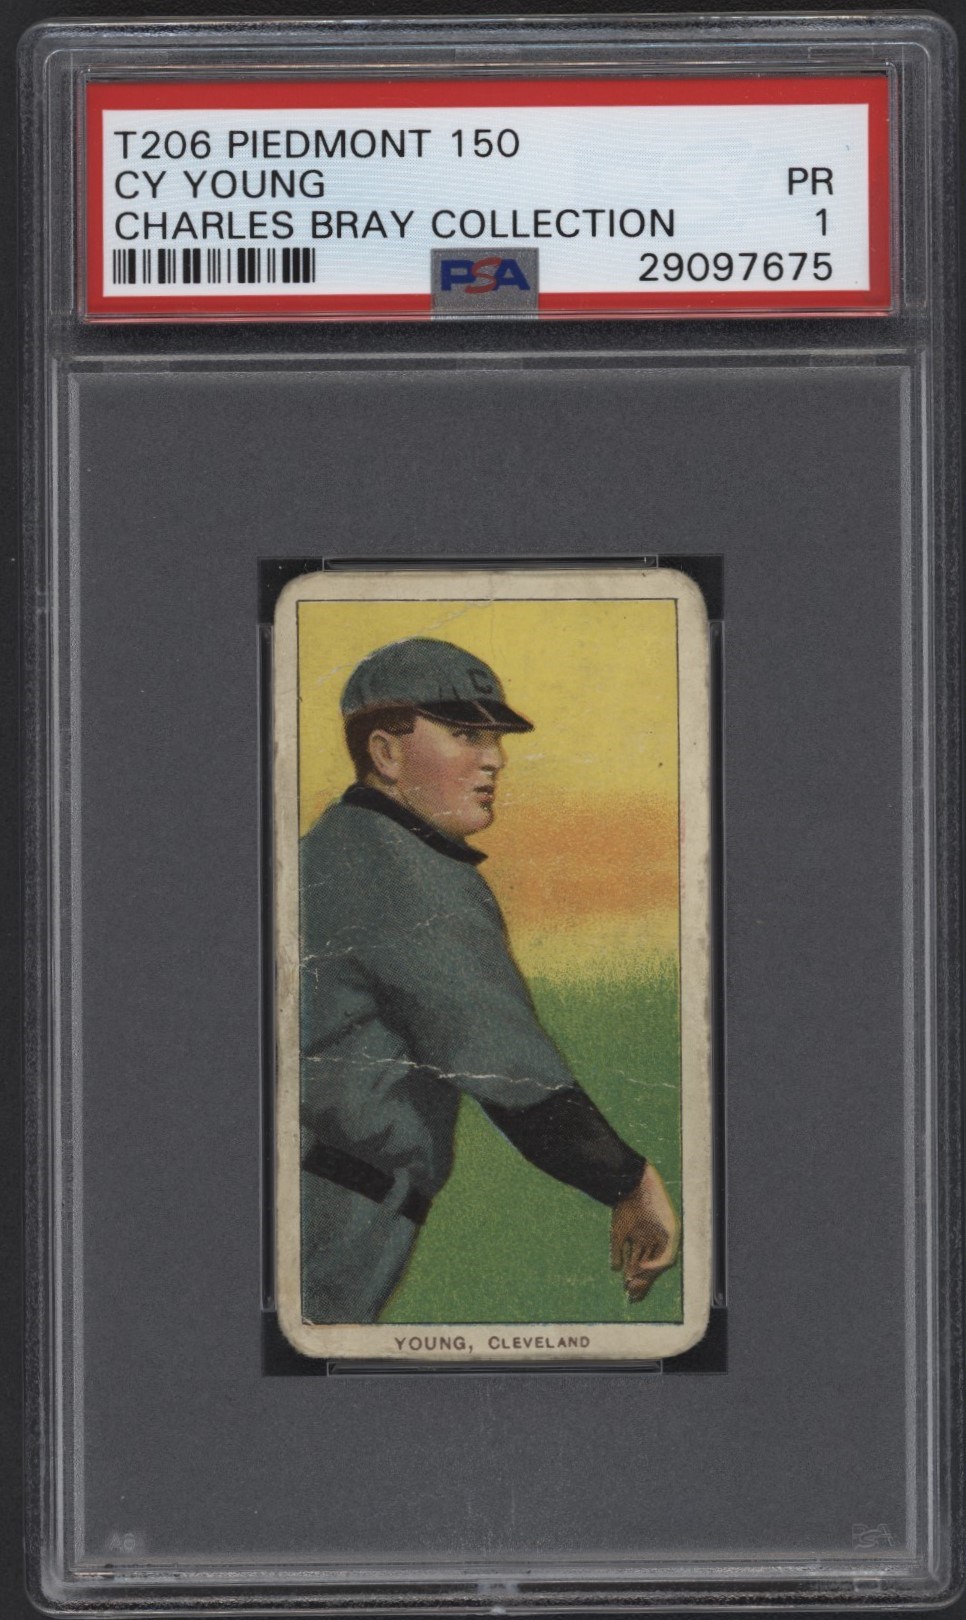 T206 Piedmont Cy Young Bare Hand PSA 1 From the Charles Bray Collection.